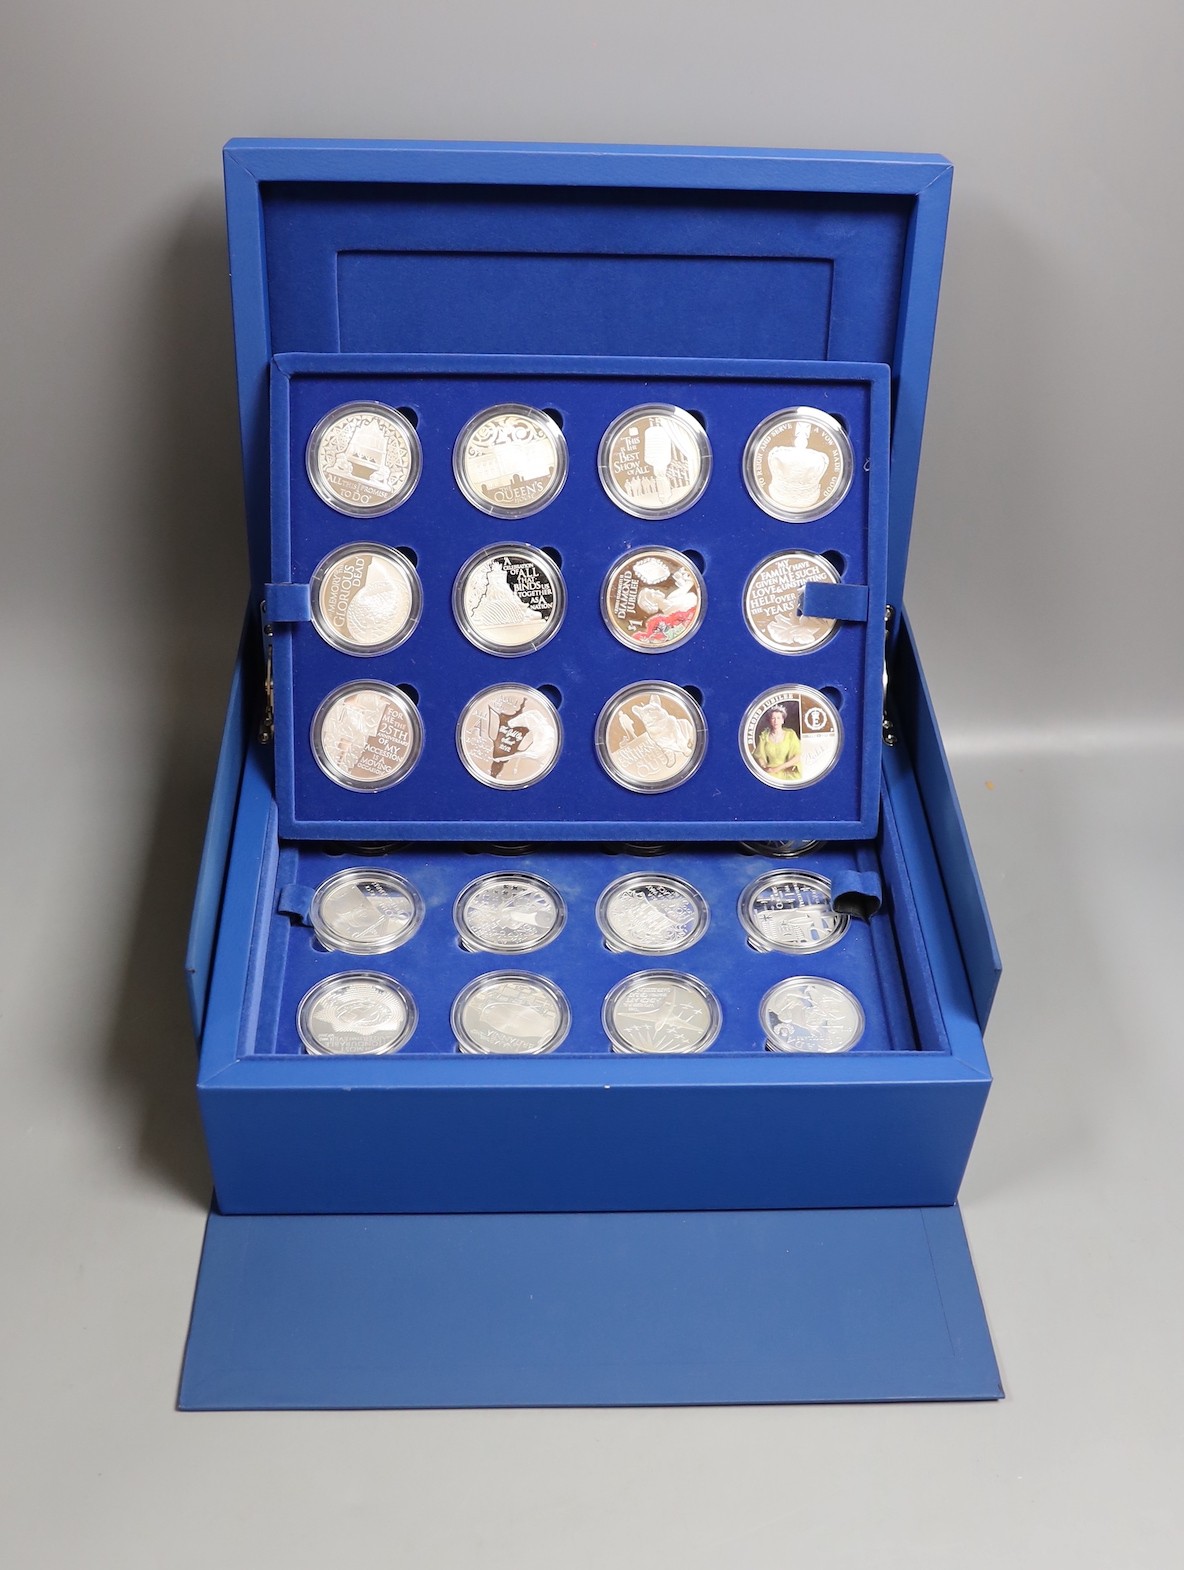 Royal Mint UK and Commonwealth Queen’s Diamond Jubilee collection of 24 silver proof coins, cased, Limited edition 15,000